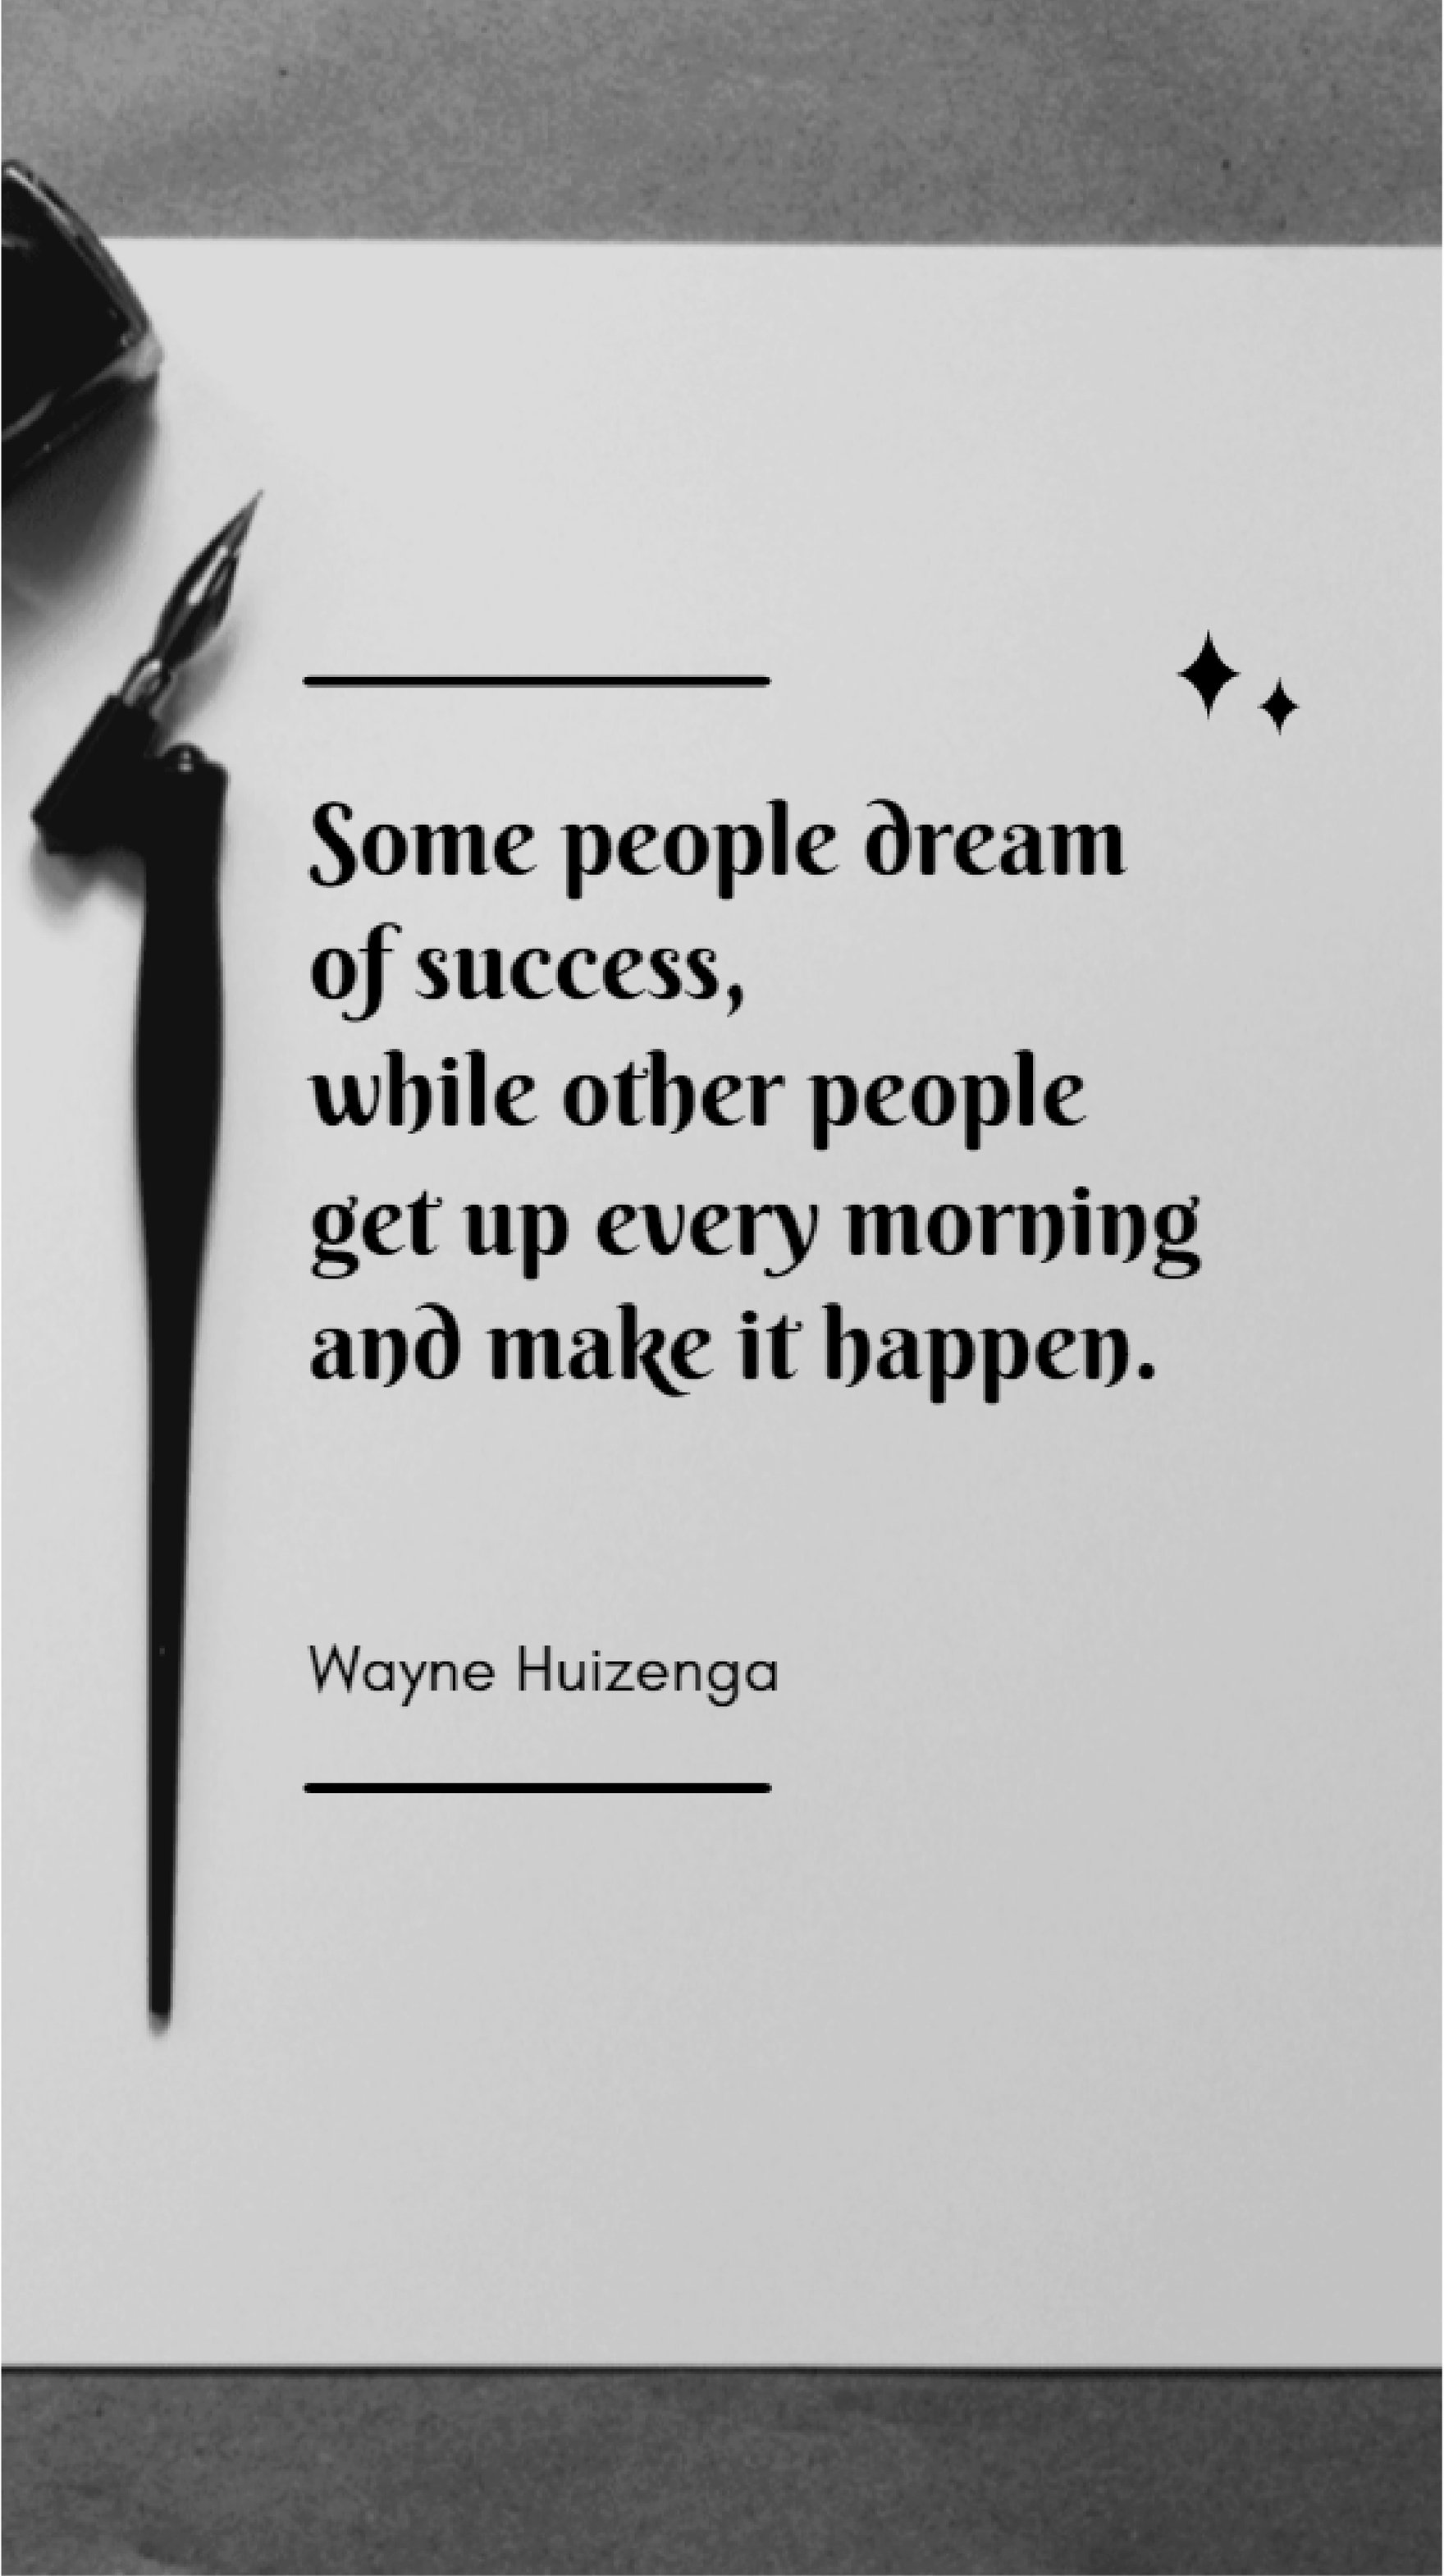 Wayne Huizenga - Some people dream of success, while other people get up every morning and make it happen.